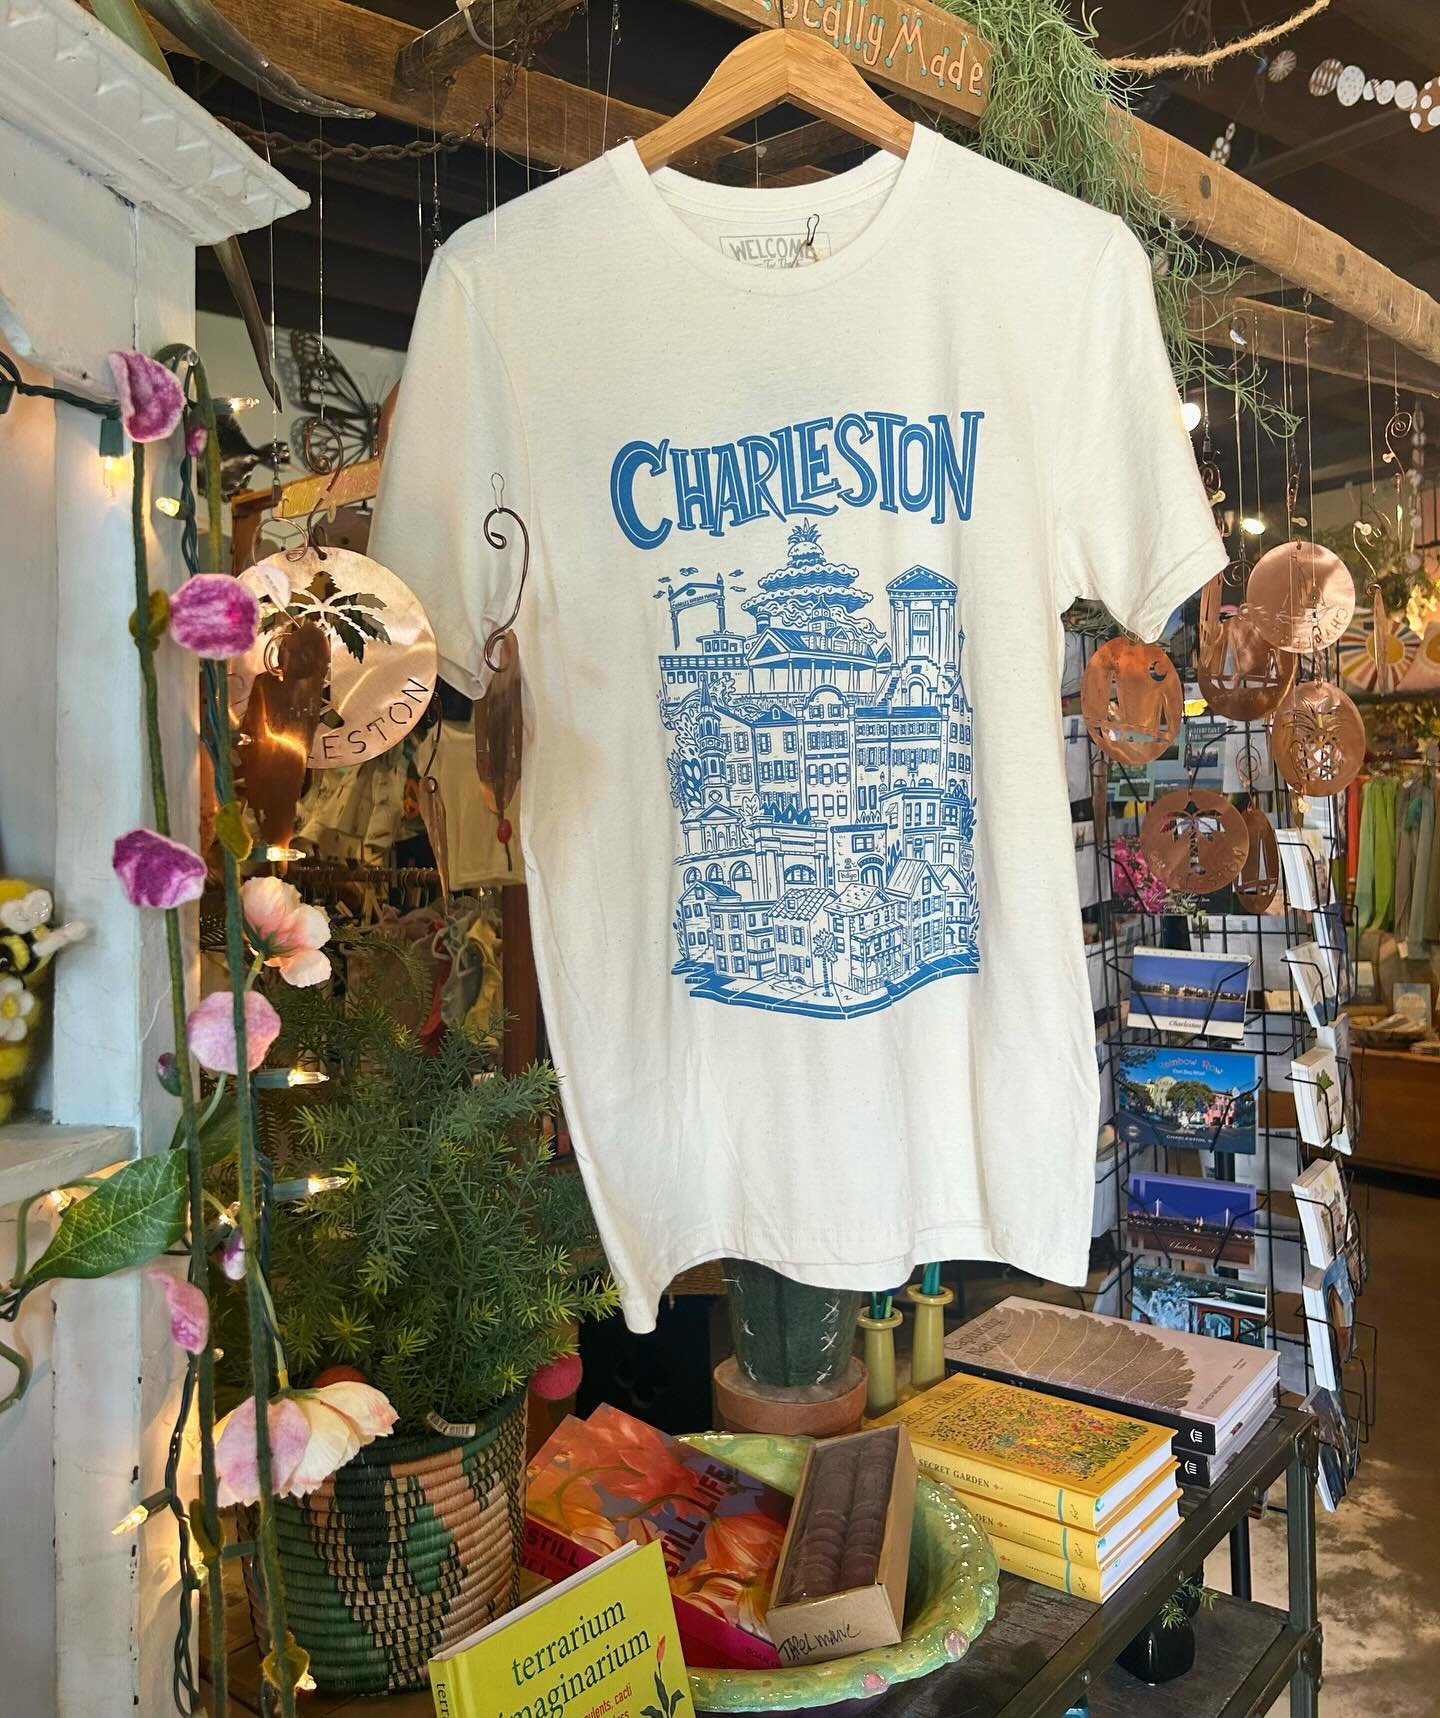 Introducing our new Charleston t-shirt! This design is brought to us by local artist @heycalebmorris ! We are so excited for this new shirt to get all the love it deserves! Come to the store to check it out 🤩🤩

#localbusiness #localcharleston #loca